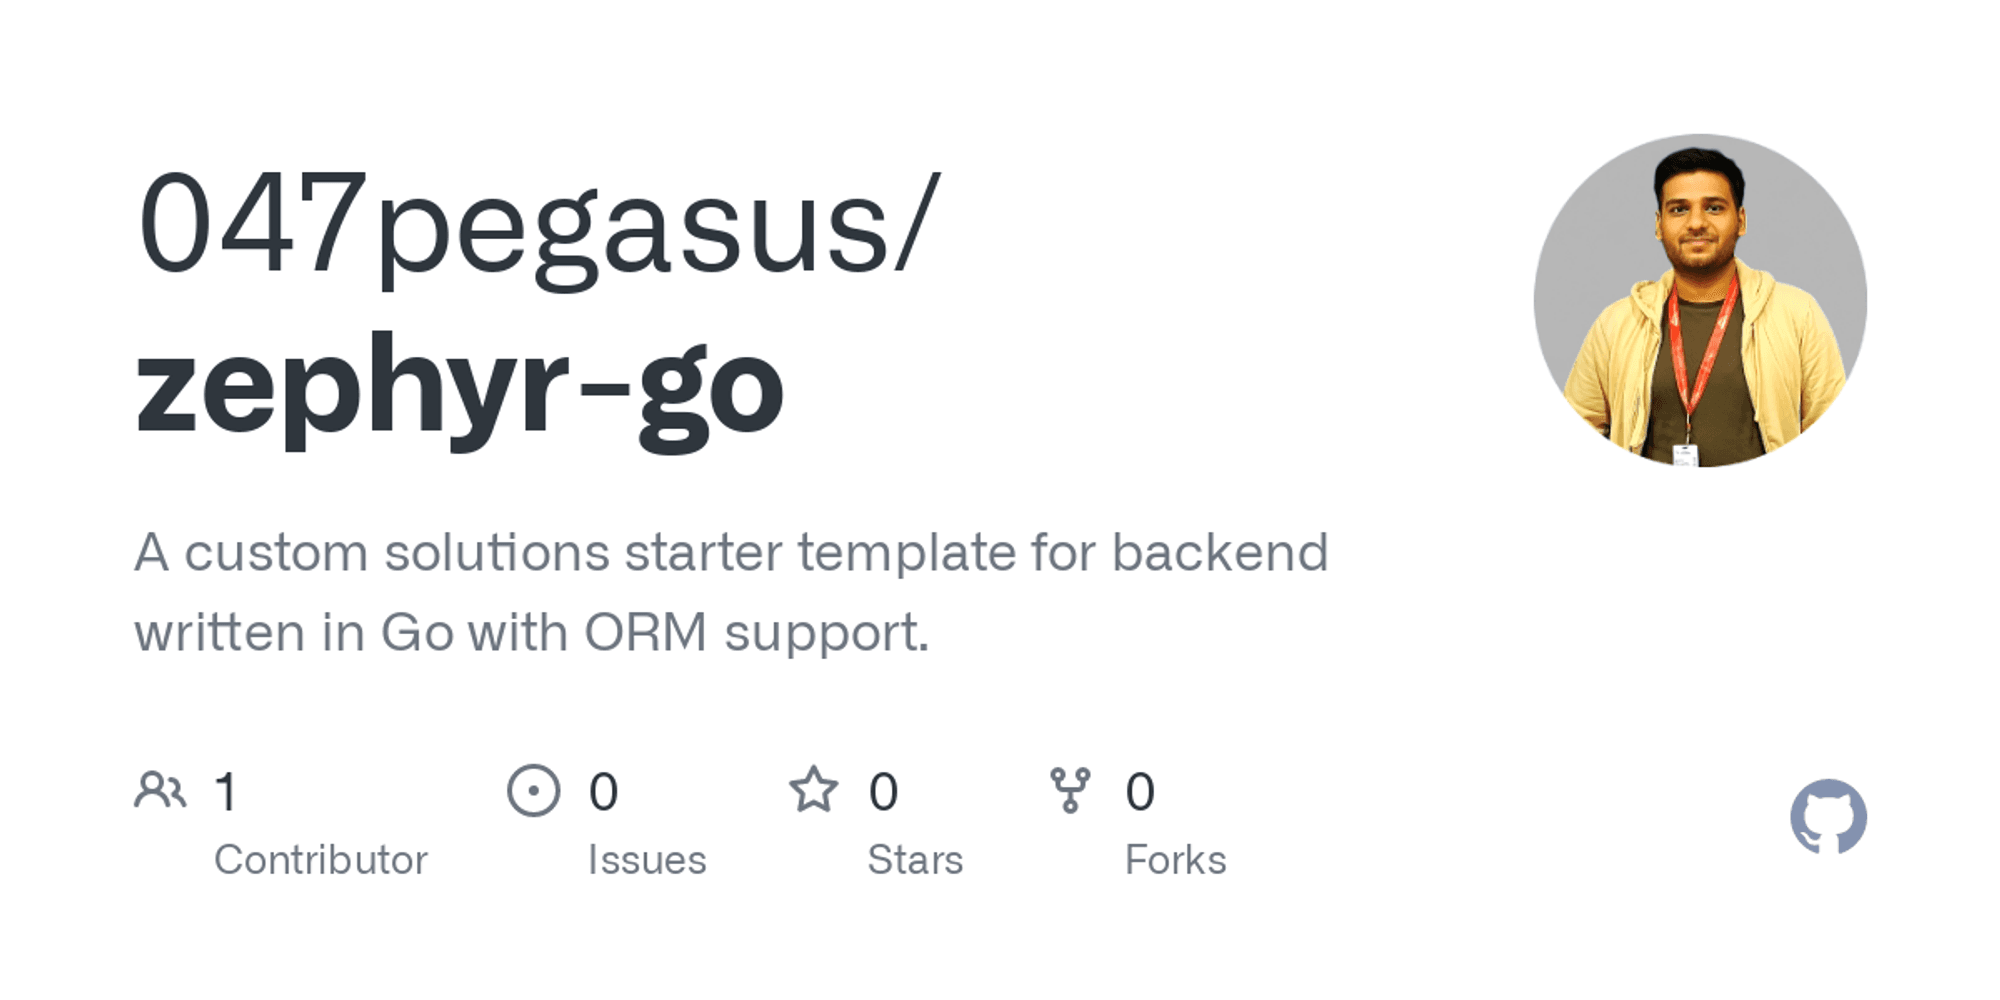 GitHub - 047pegasus/zephyr-go: A custom solutions starter template for backend written in Go with ORM support.